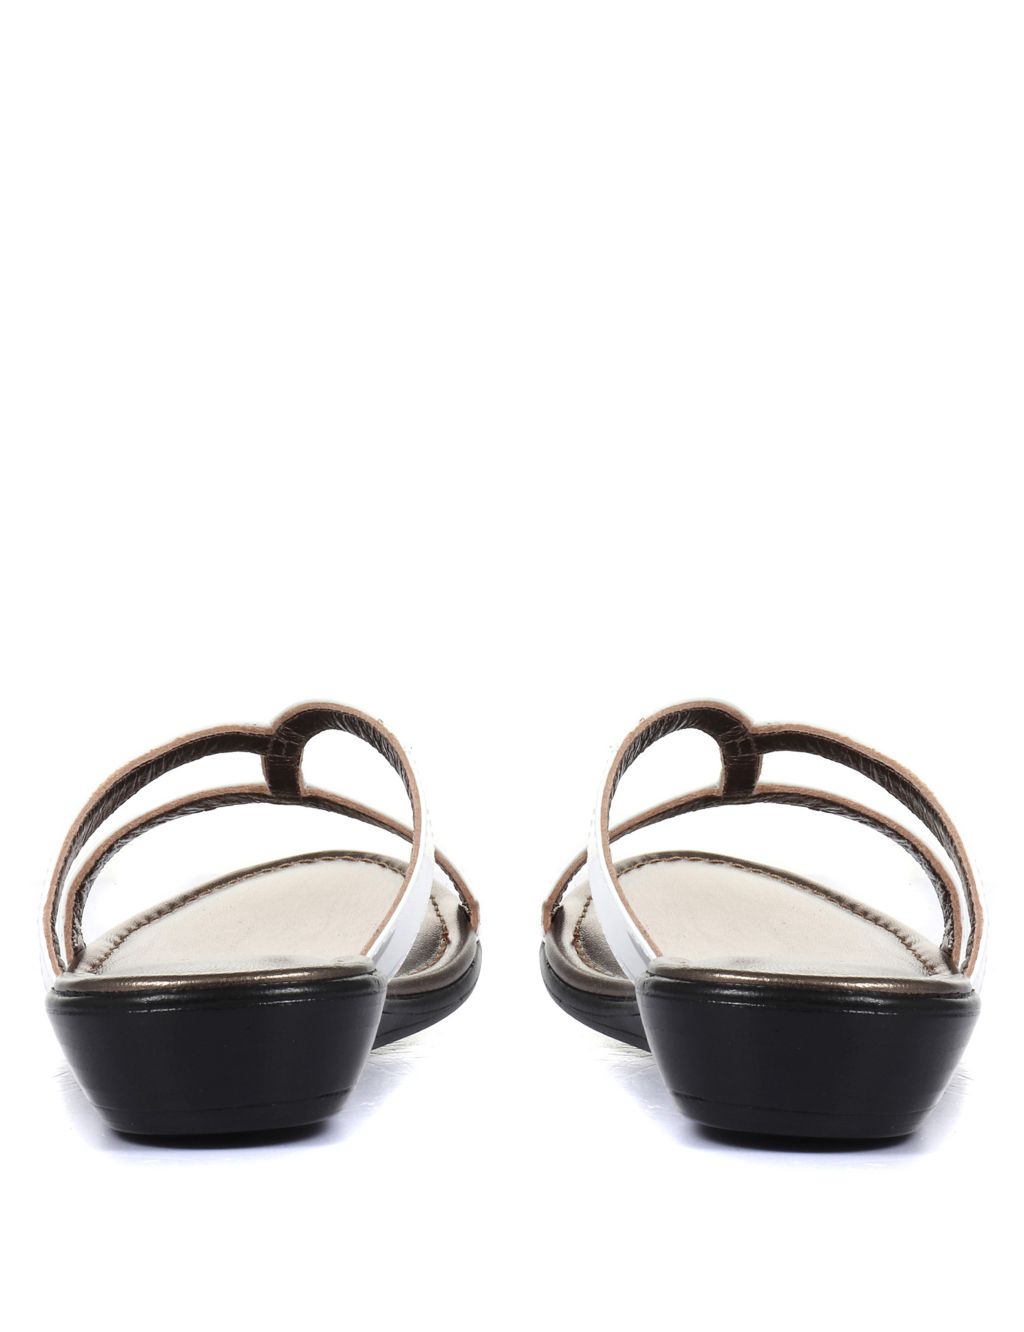 Leather Patent Strappy Flat Mule Sandals image 4